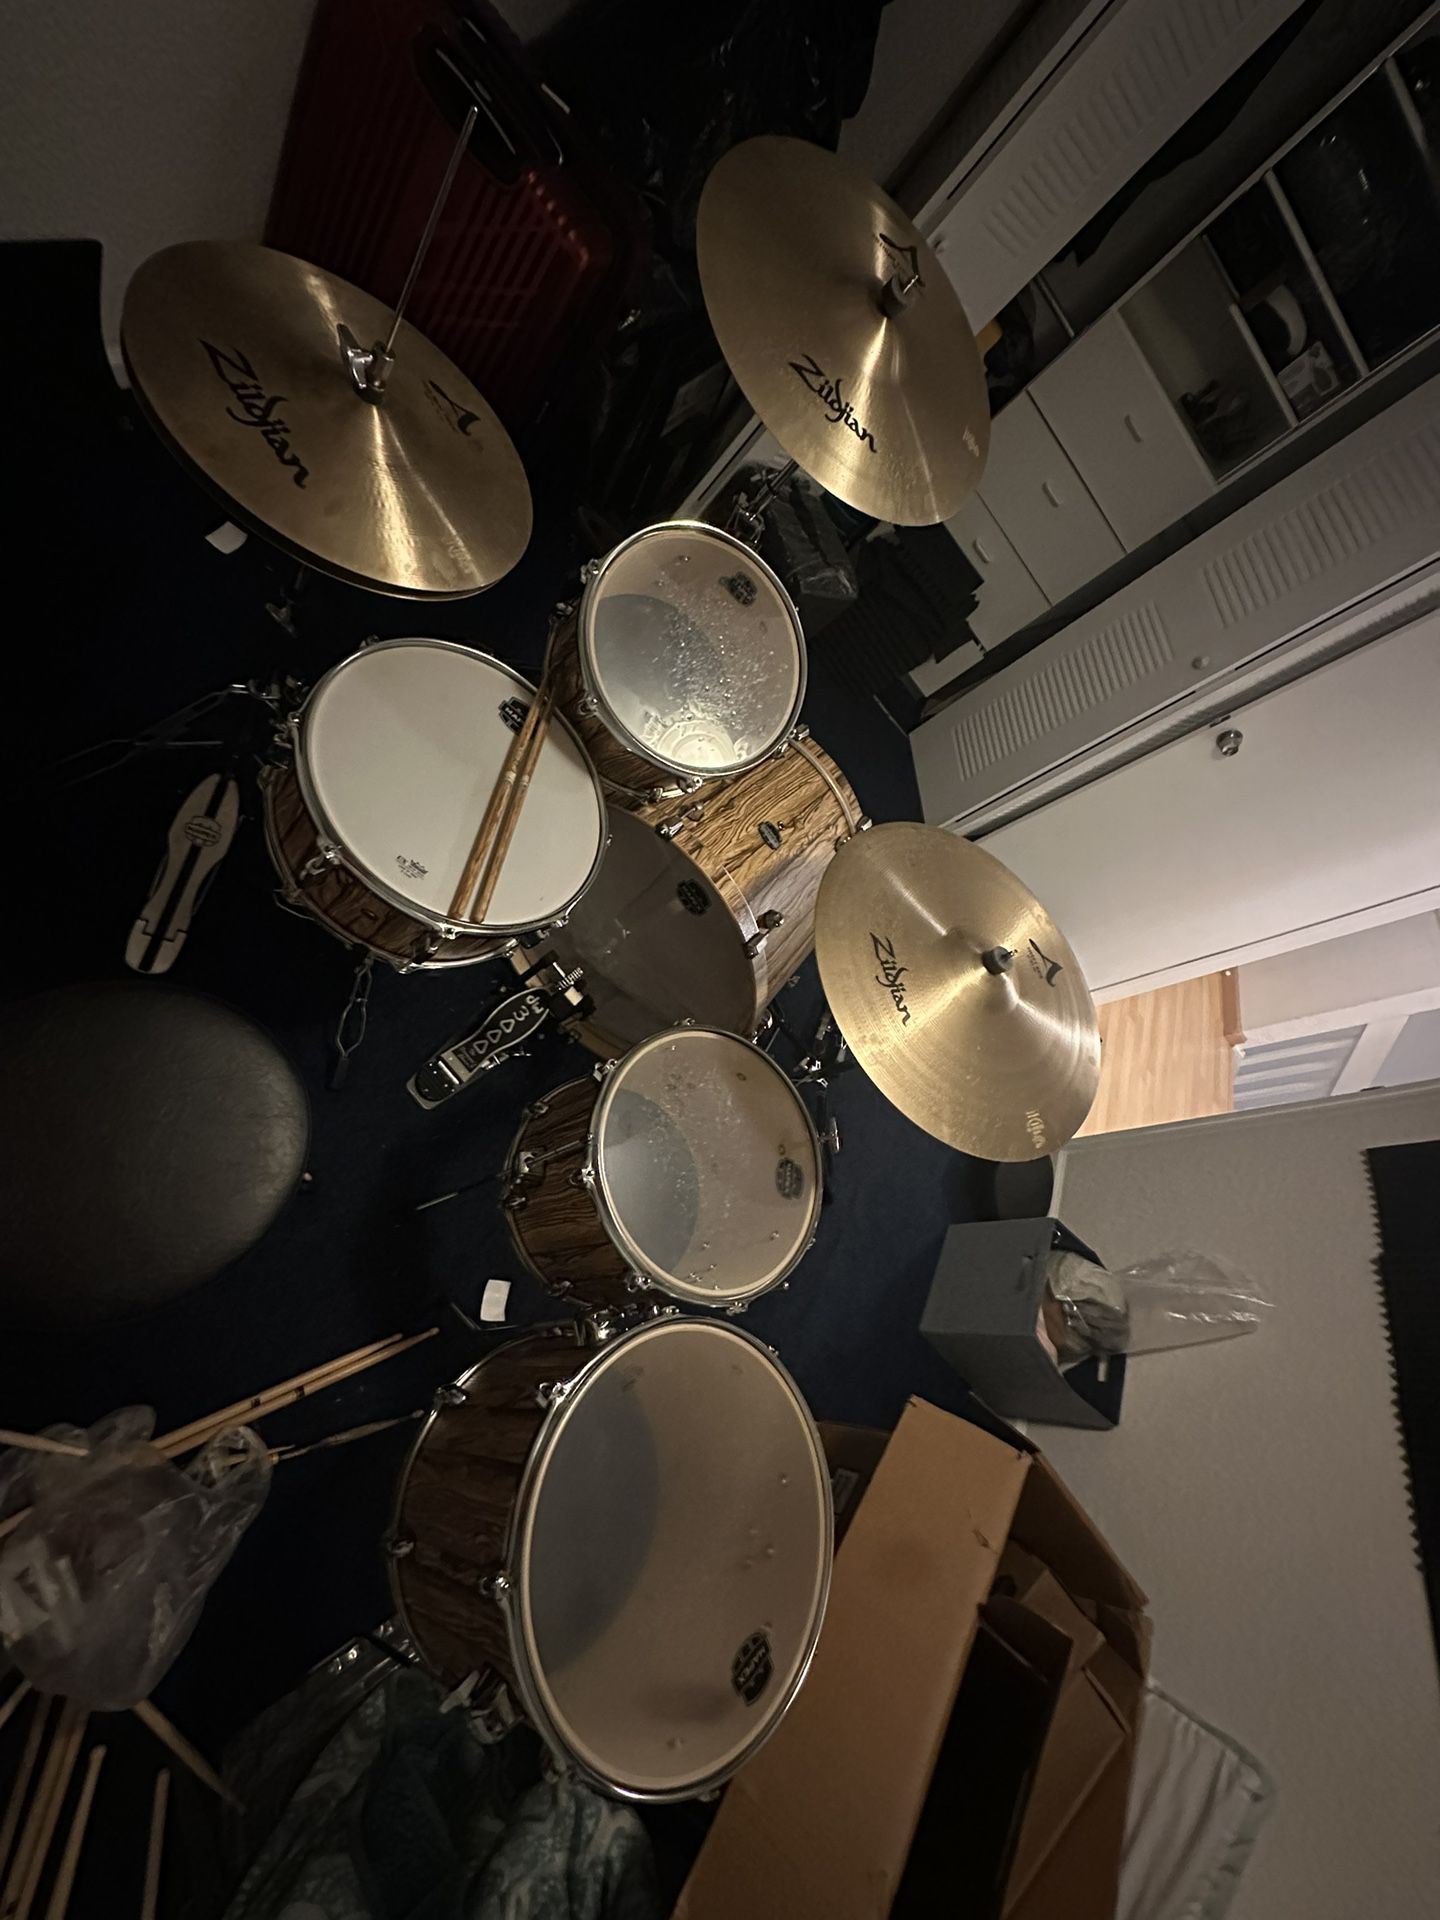 Mapex Drums With Zildjan Cymbals Barely Used 